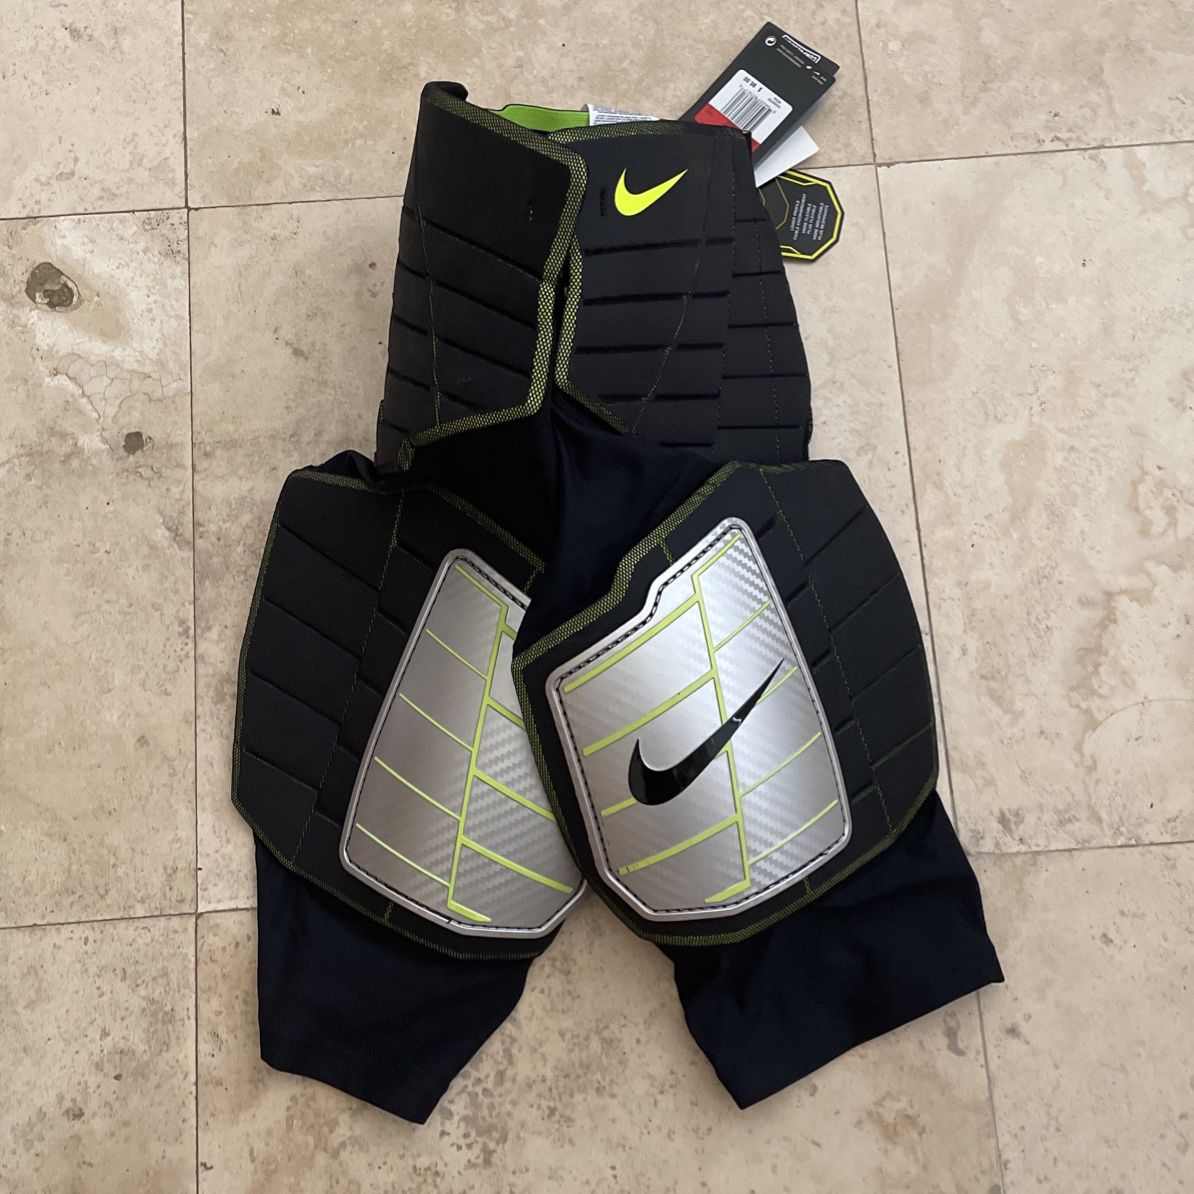 New, Nike Pro Combat Adult (L) 5-Pad Integrated Football Girdle